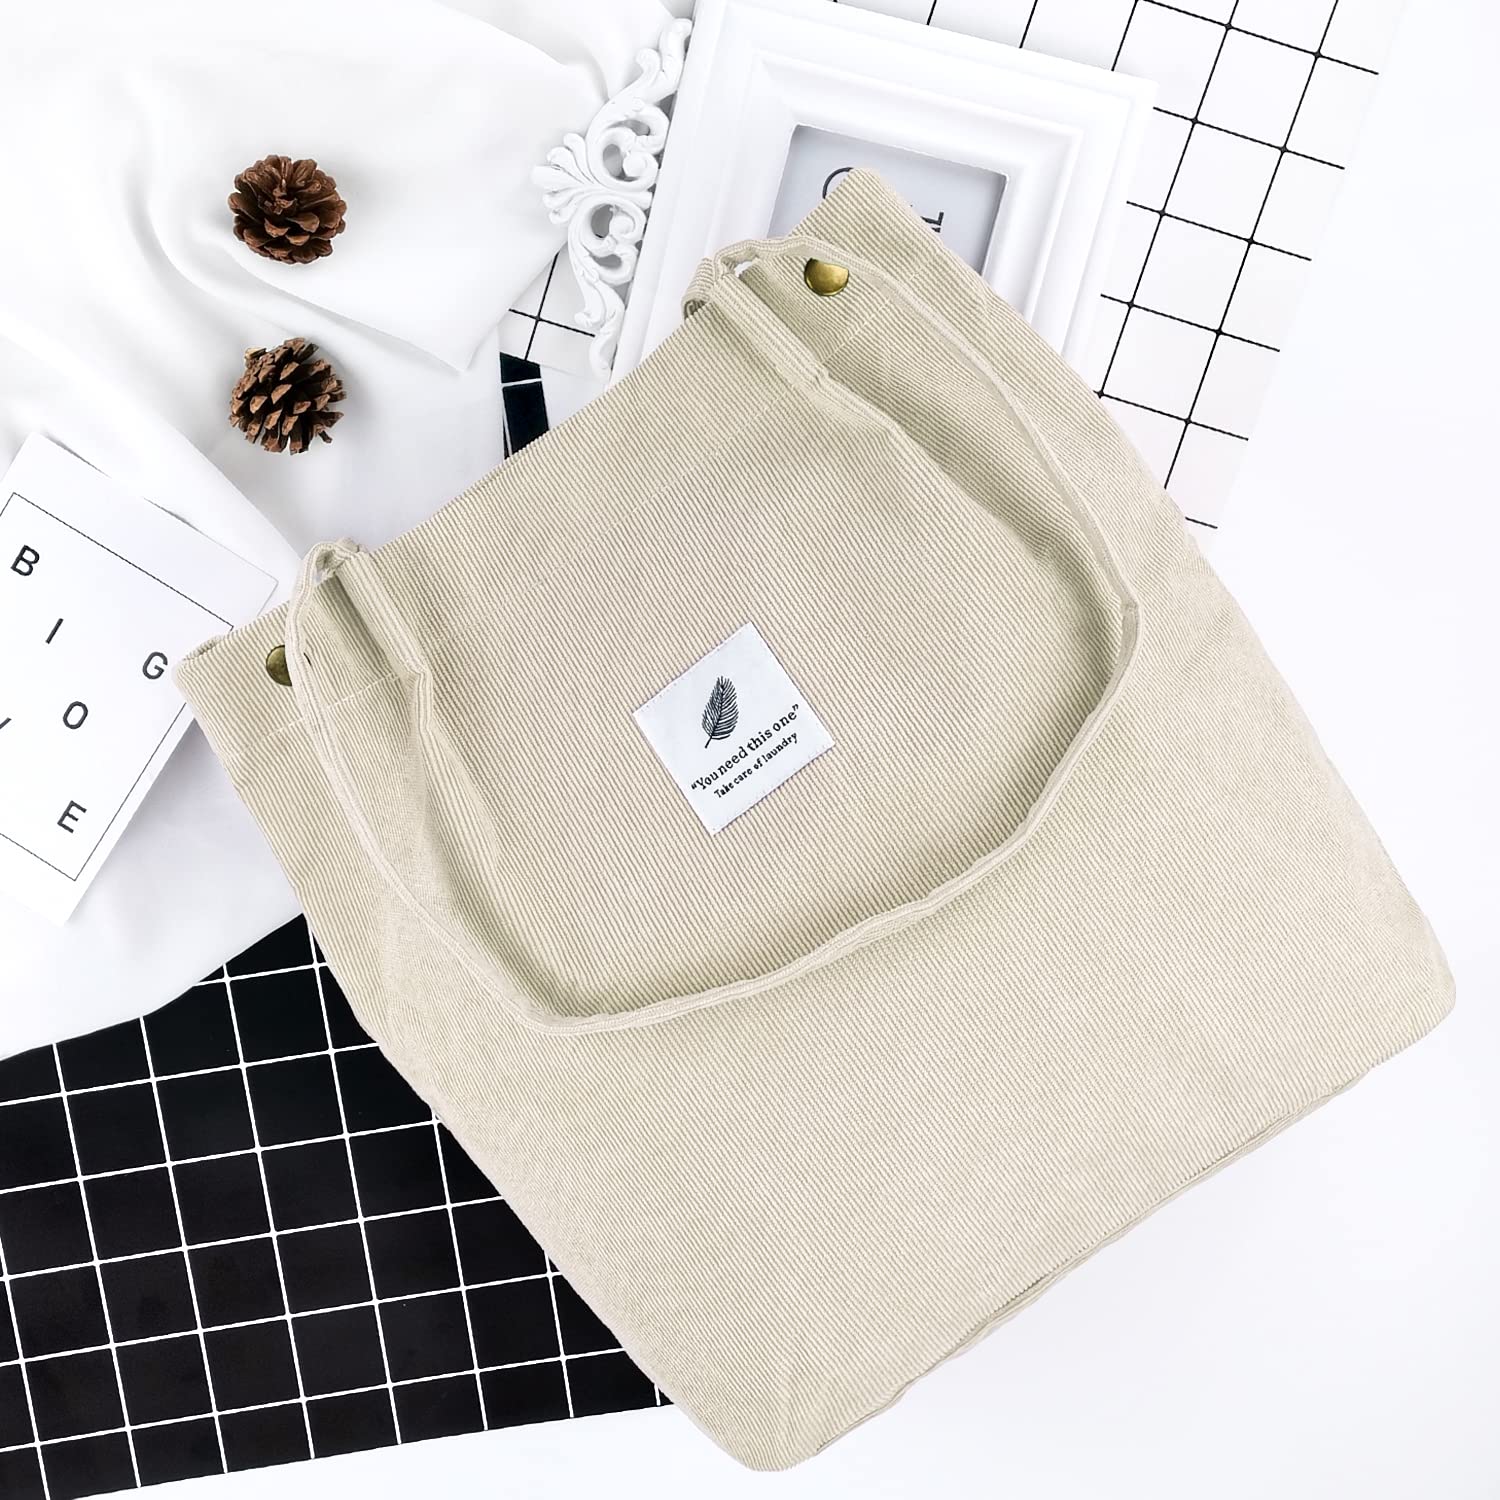 Cotton Canvas Tote Bag with handles